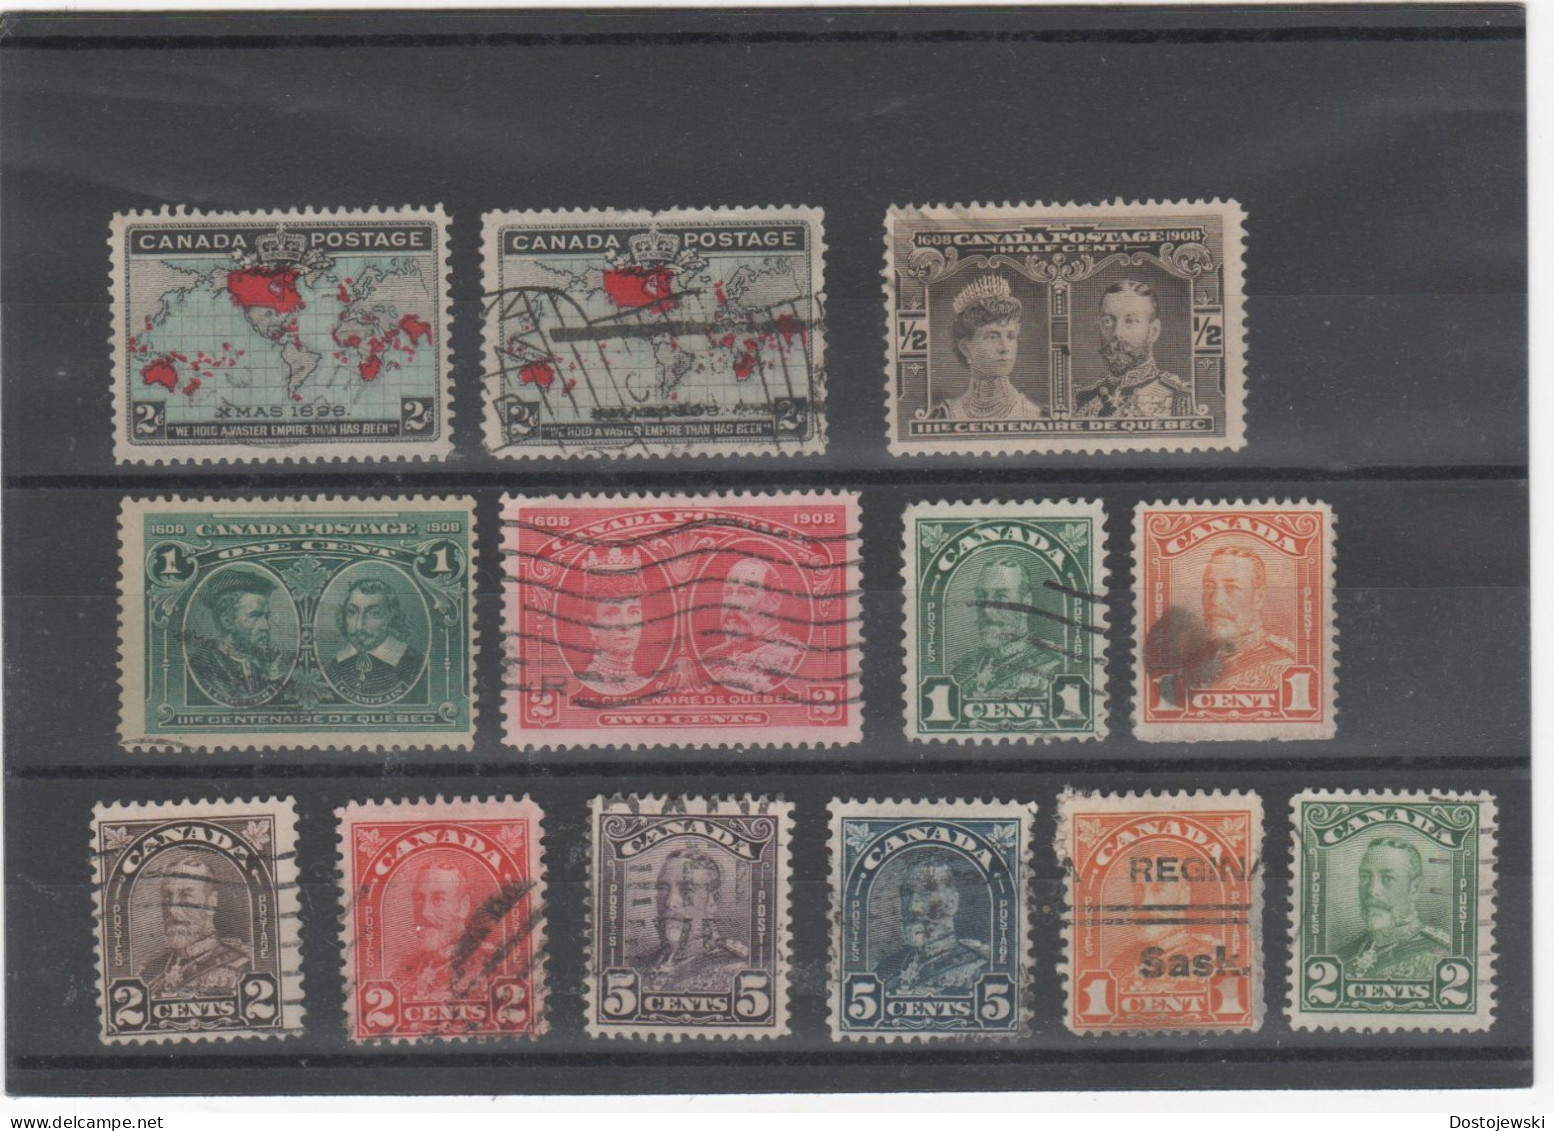 Canada - Kanada, Lot Of Used Stamps Ex 1898-c. 1930, 13 Stamps - Oblitérés